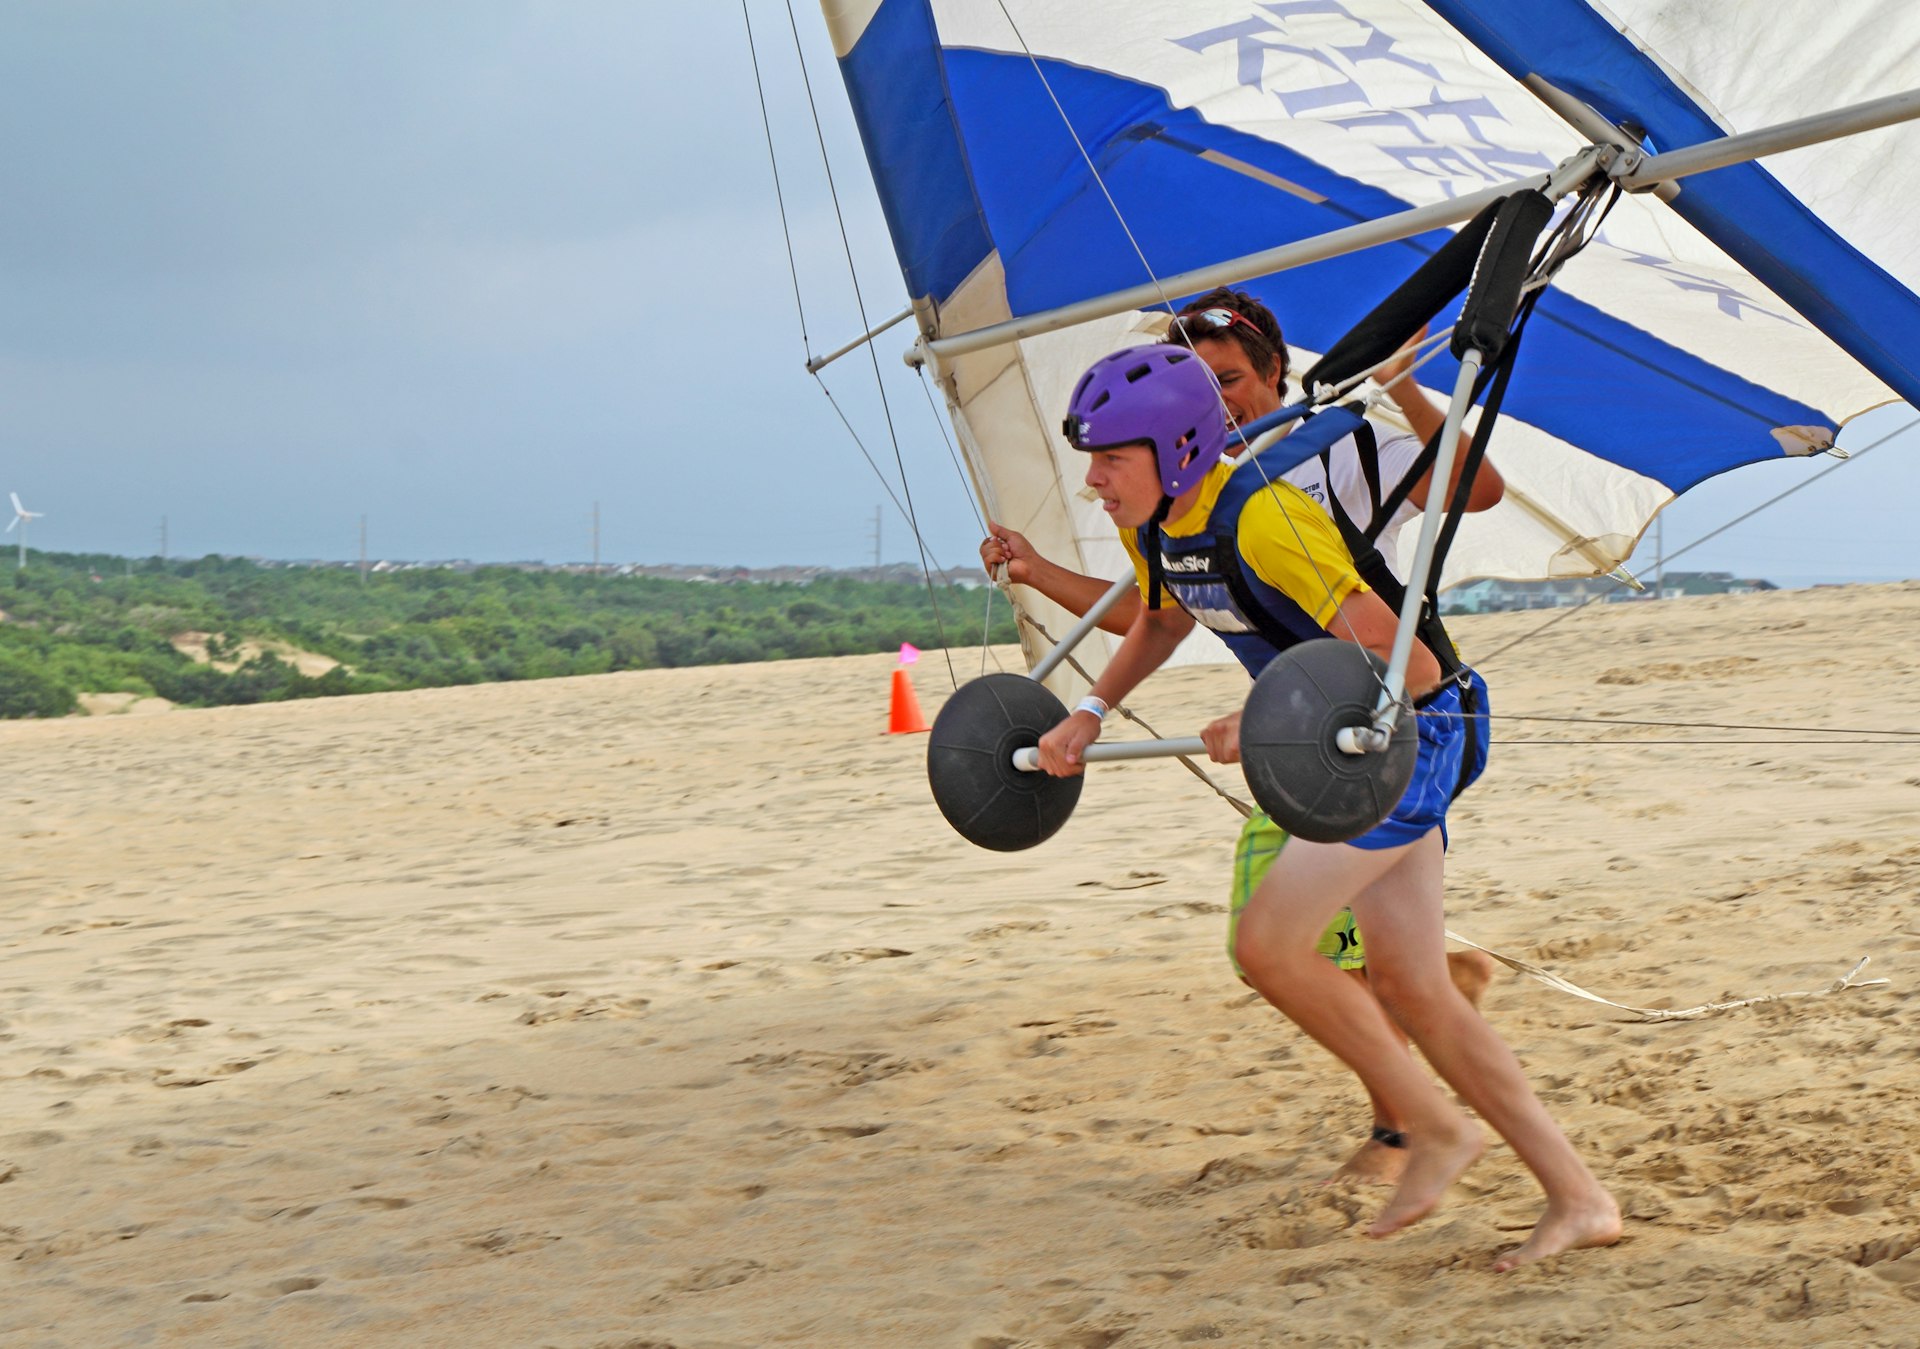 A person prepares for takeoff in a hang glider over a beach